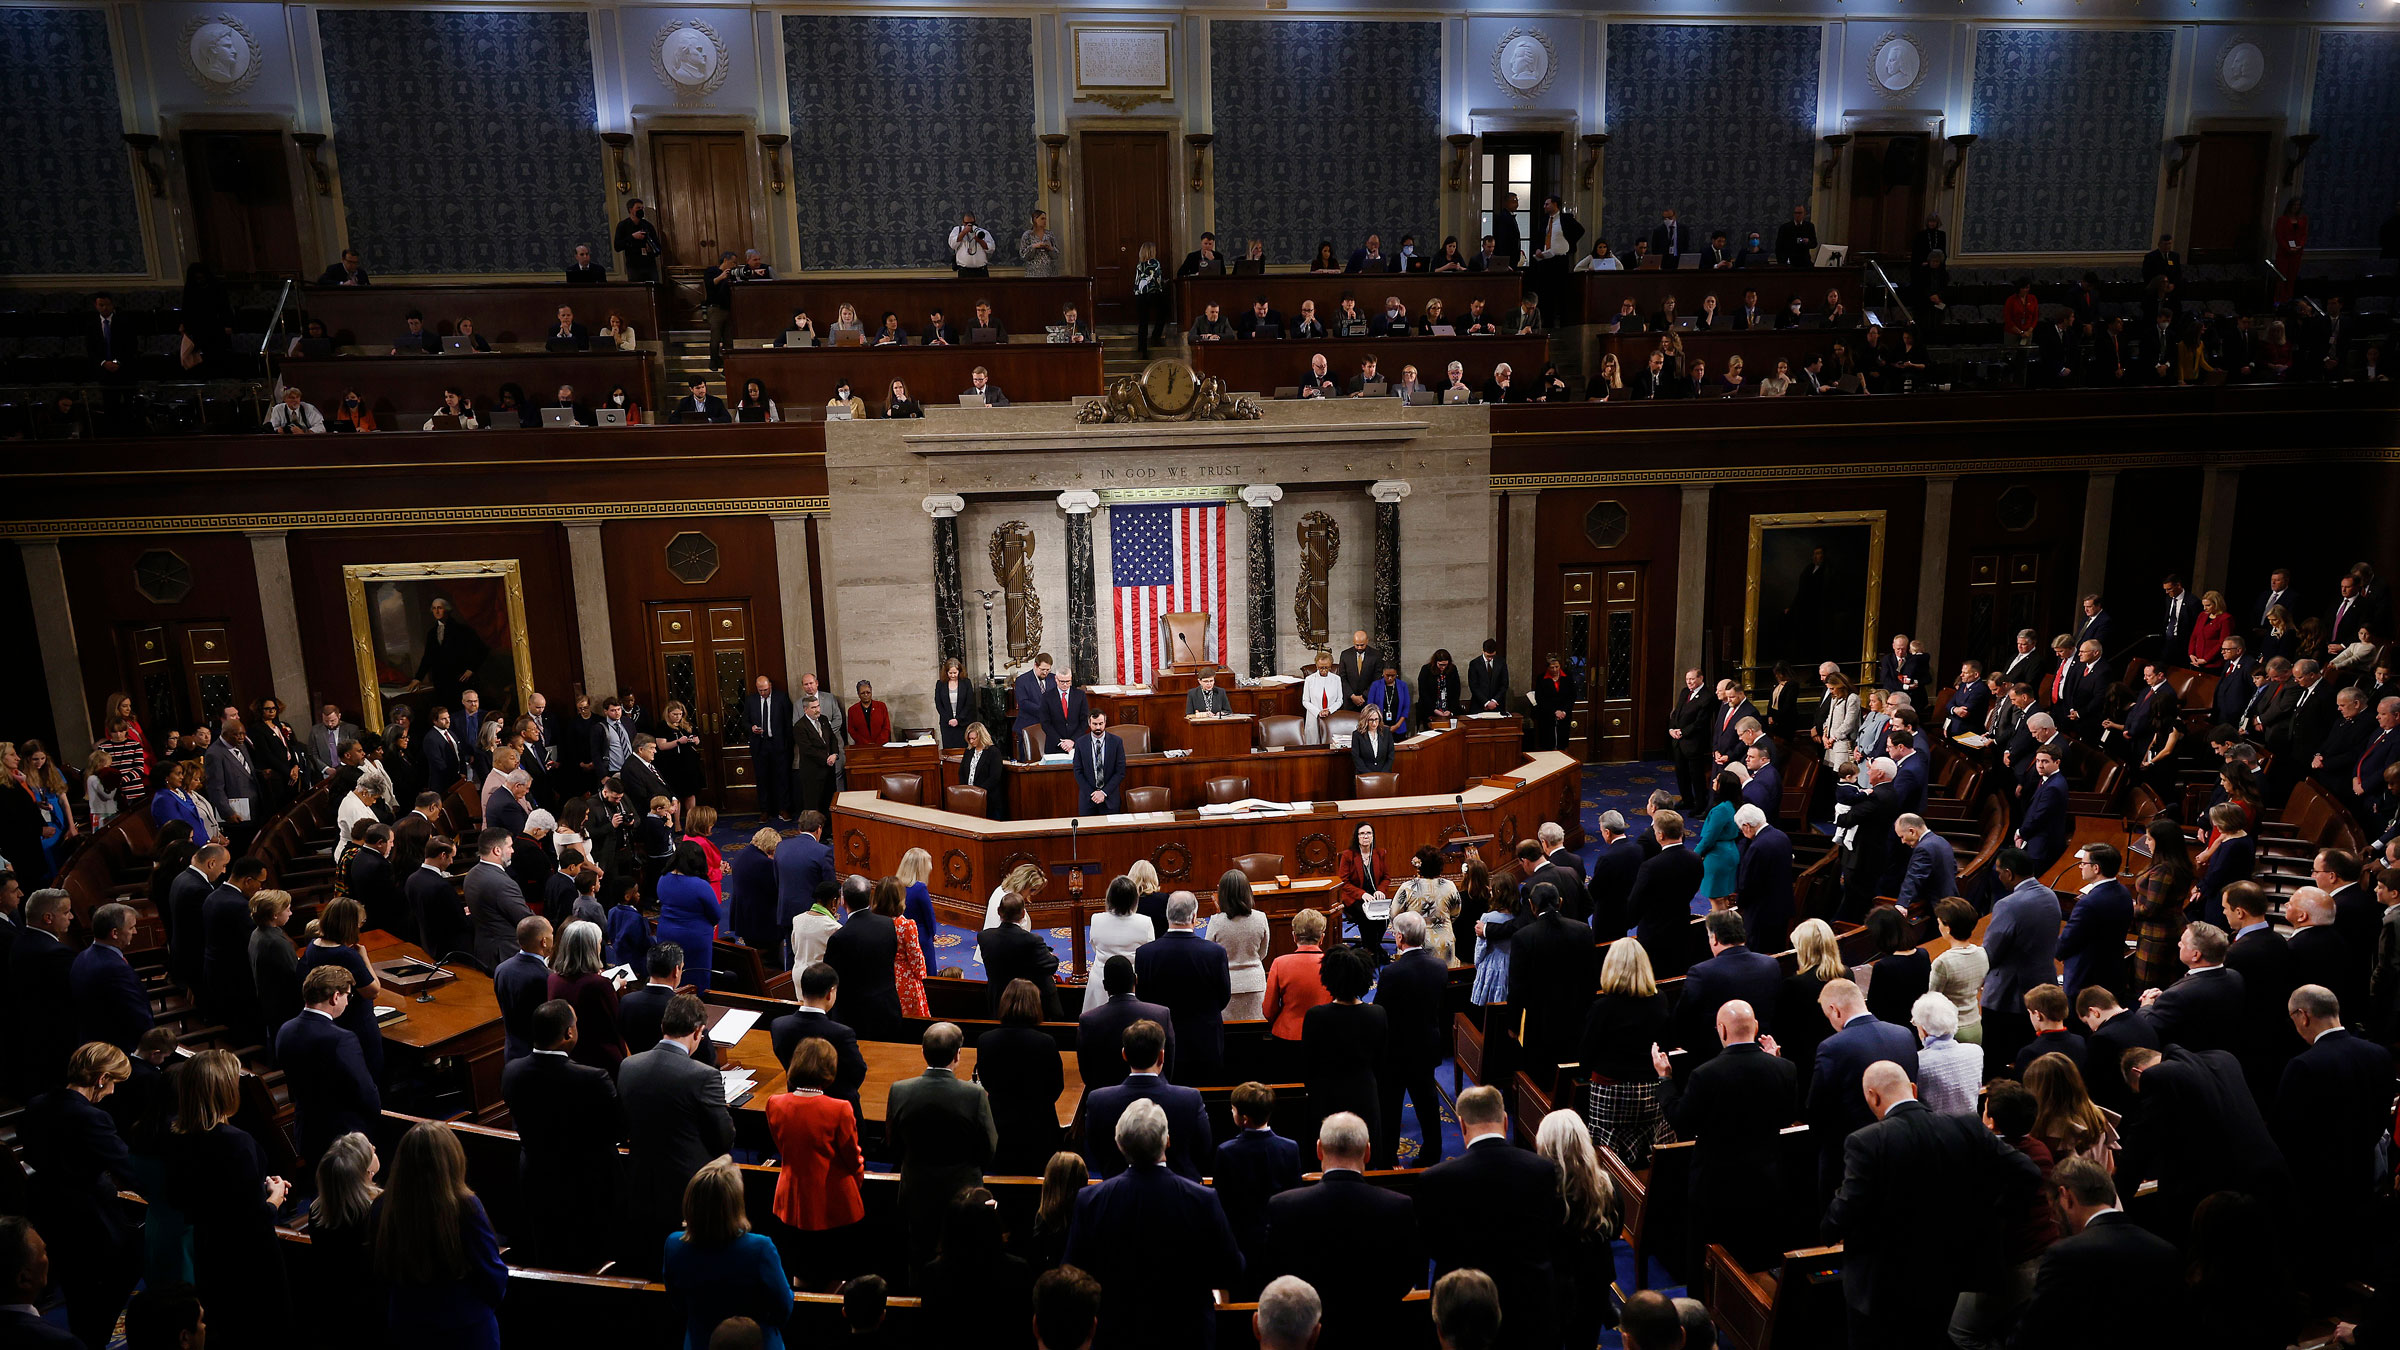 Members of the 118th Congress stand for the Pledge of Allegiance on Tuesday.